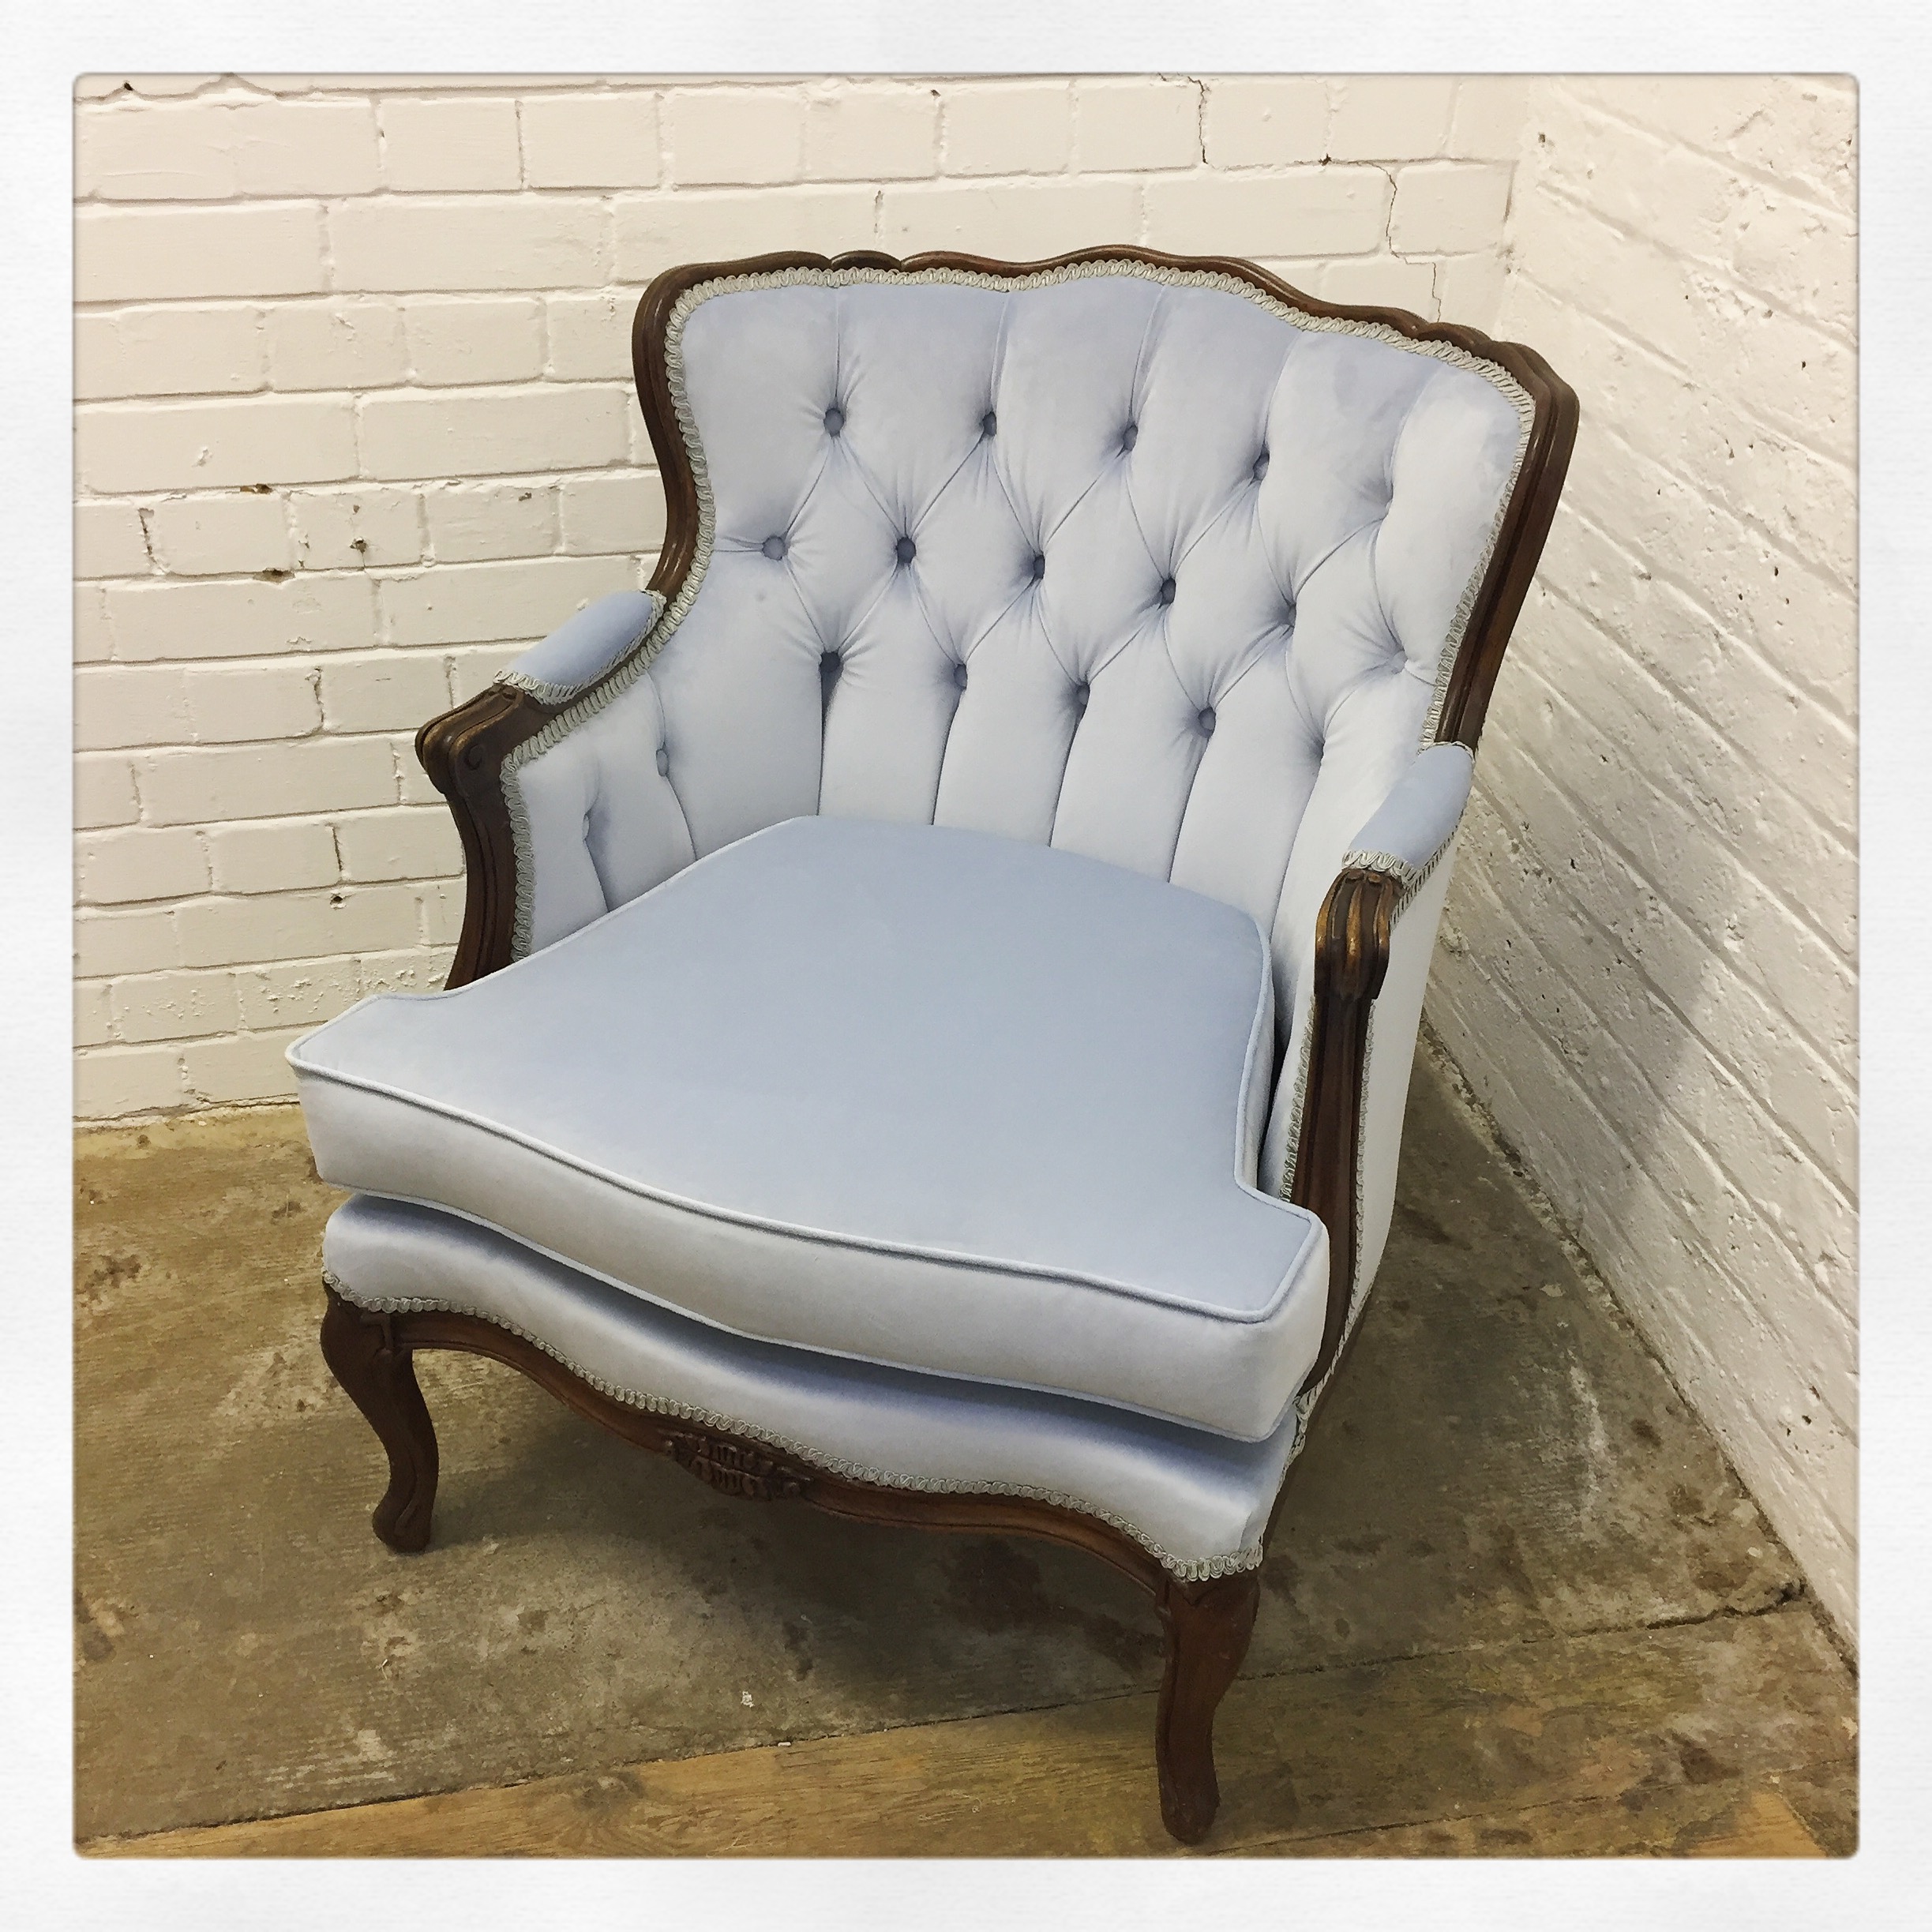 Baby Blue Antique Chair Upholstery